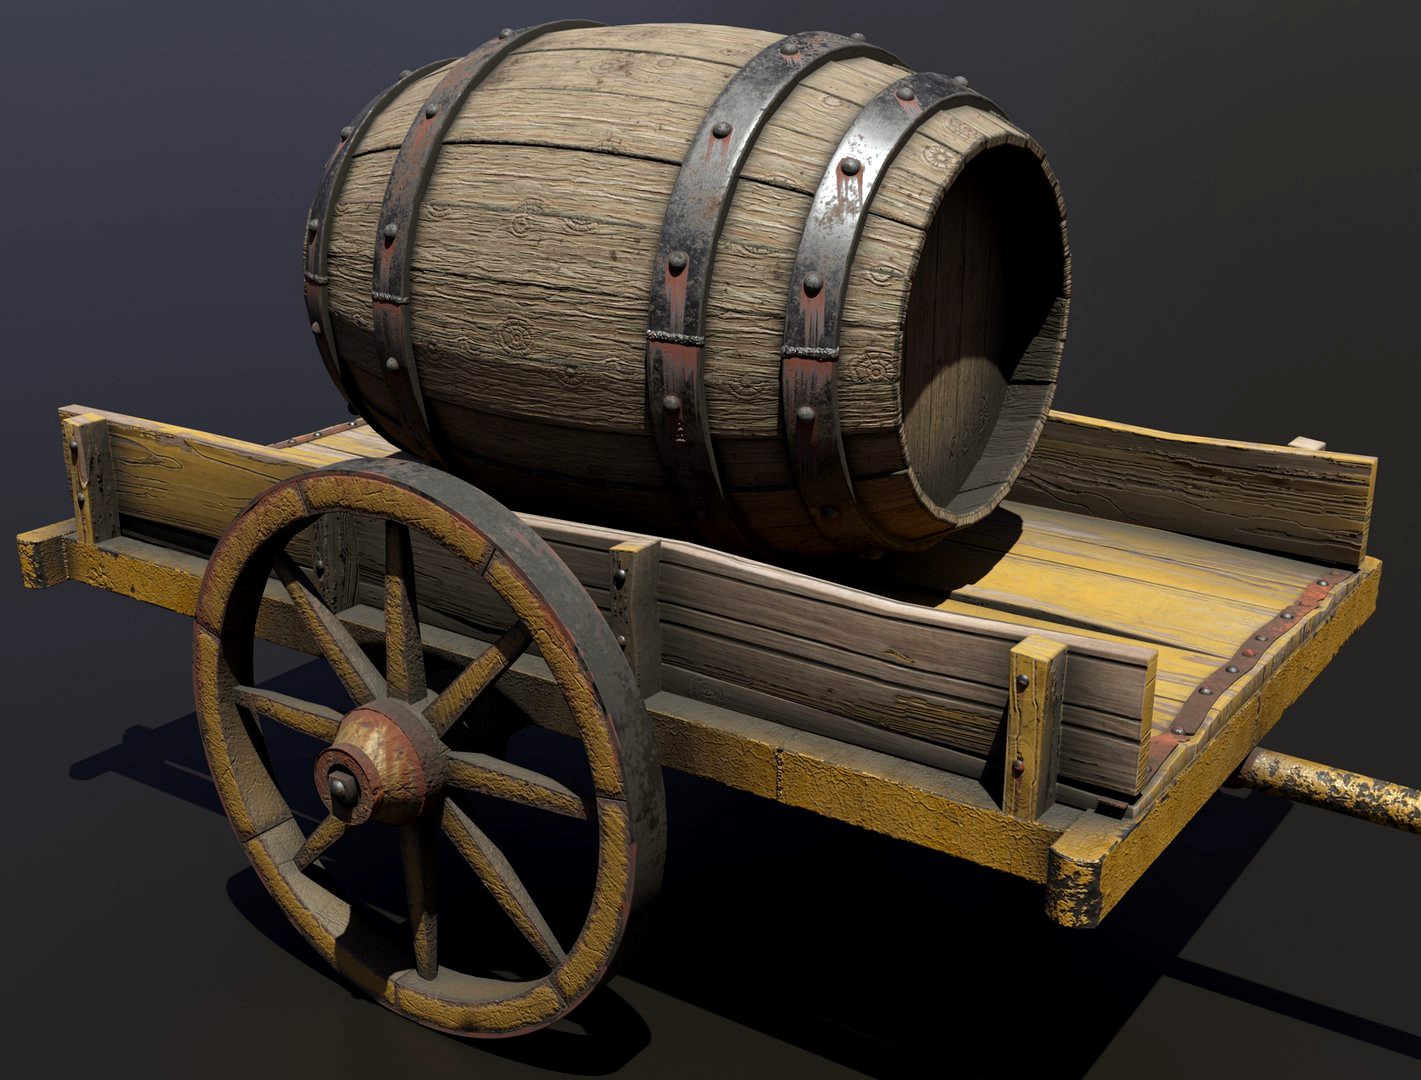 Trailer with barrel